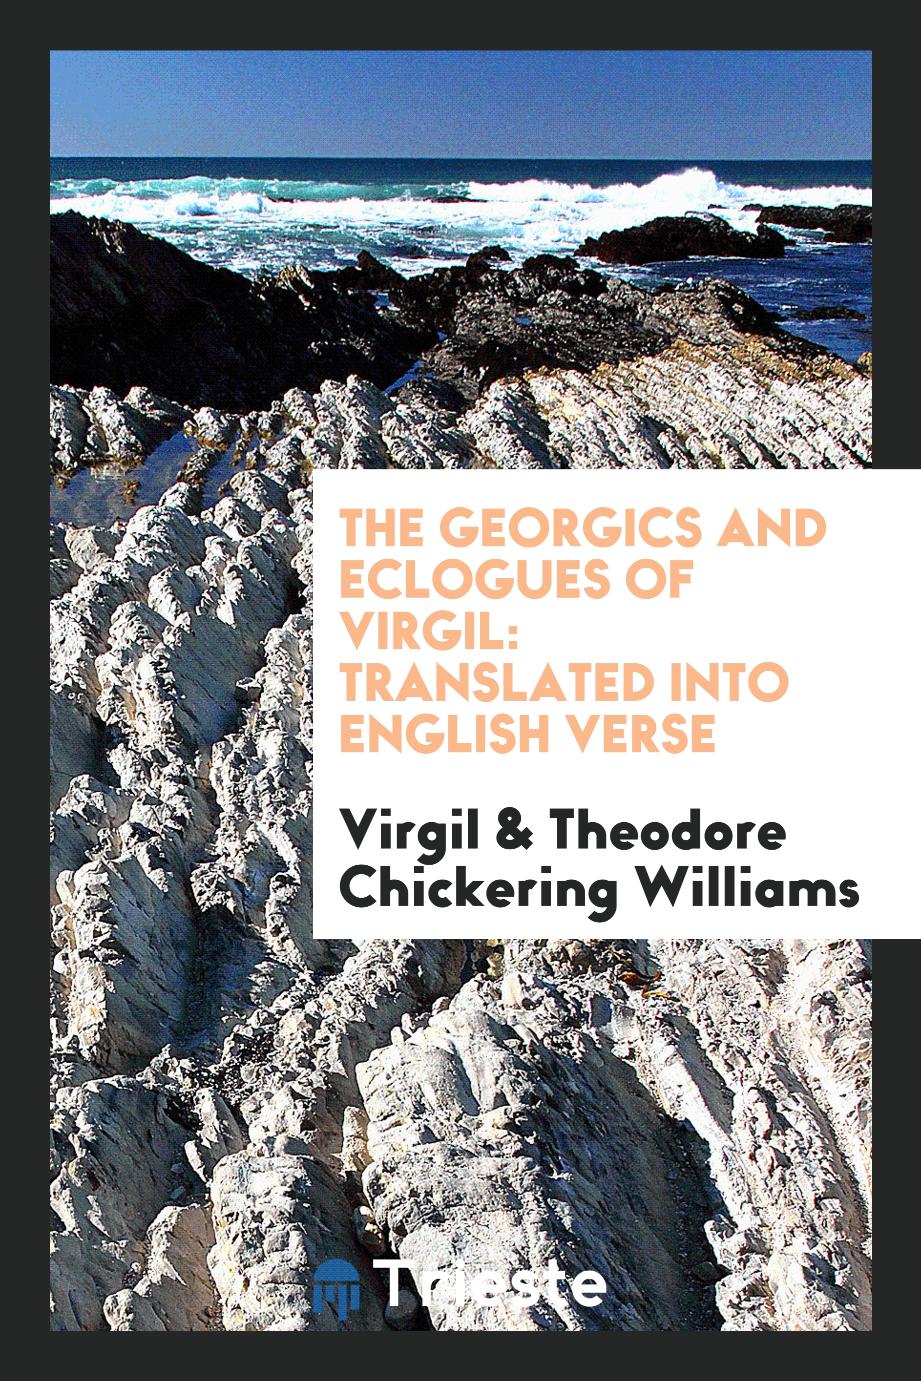 The Georgics and Eclogues of Virgil: Translated into English Verse